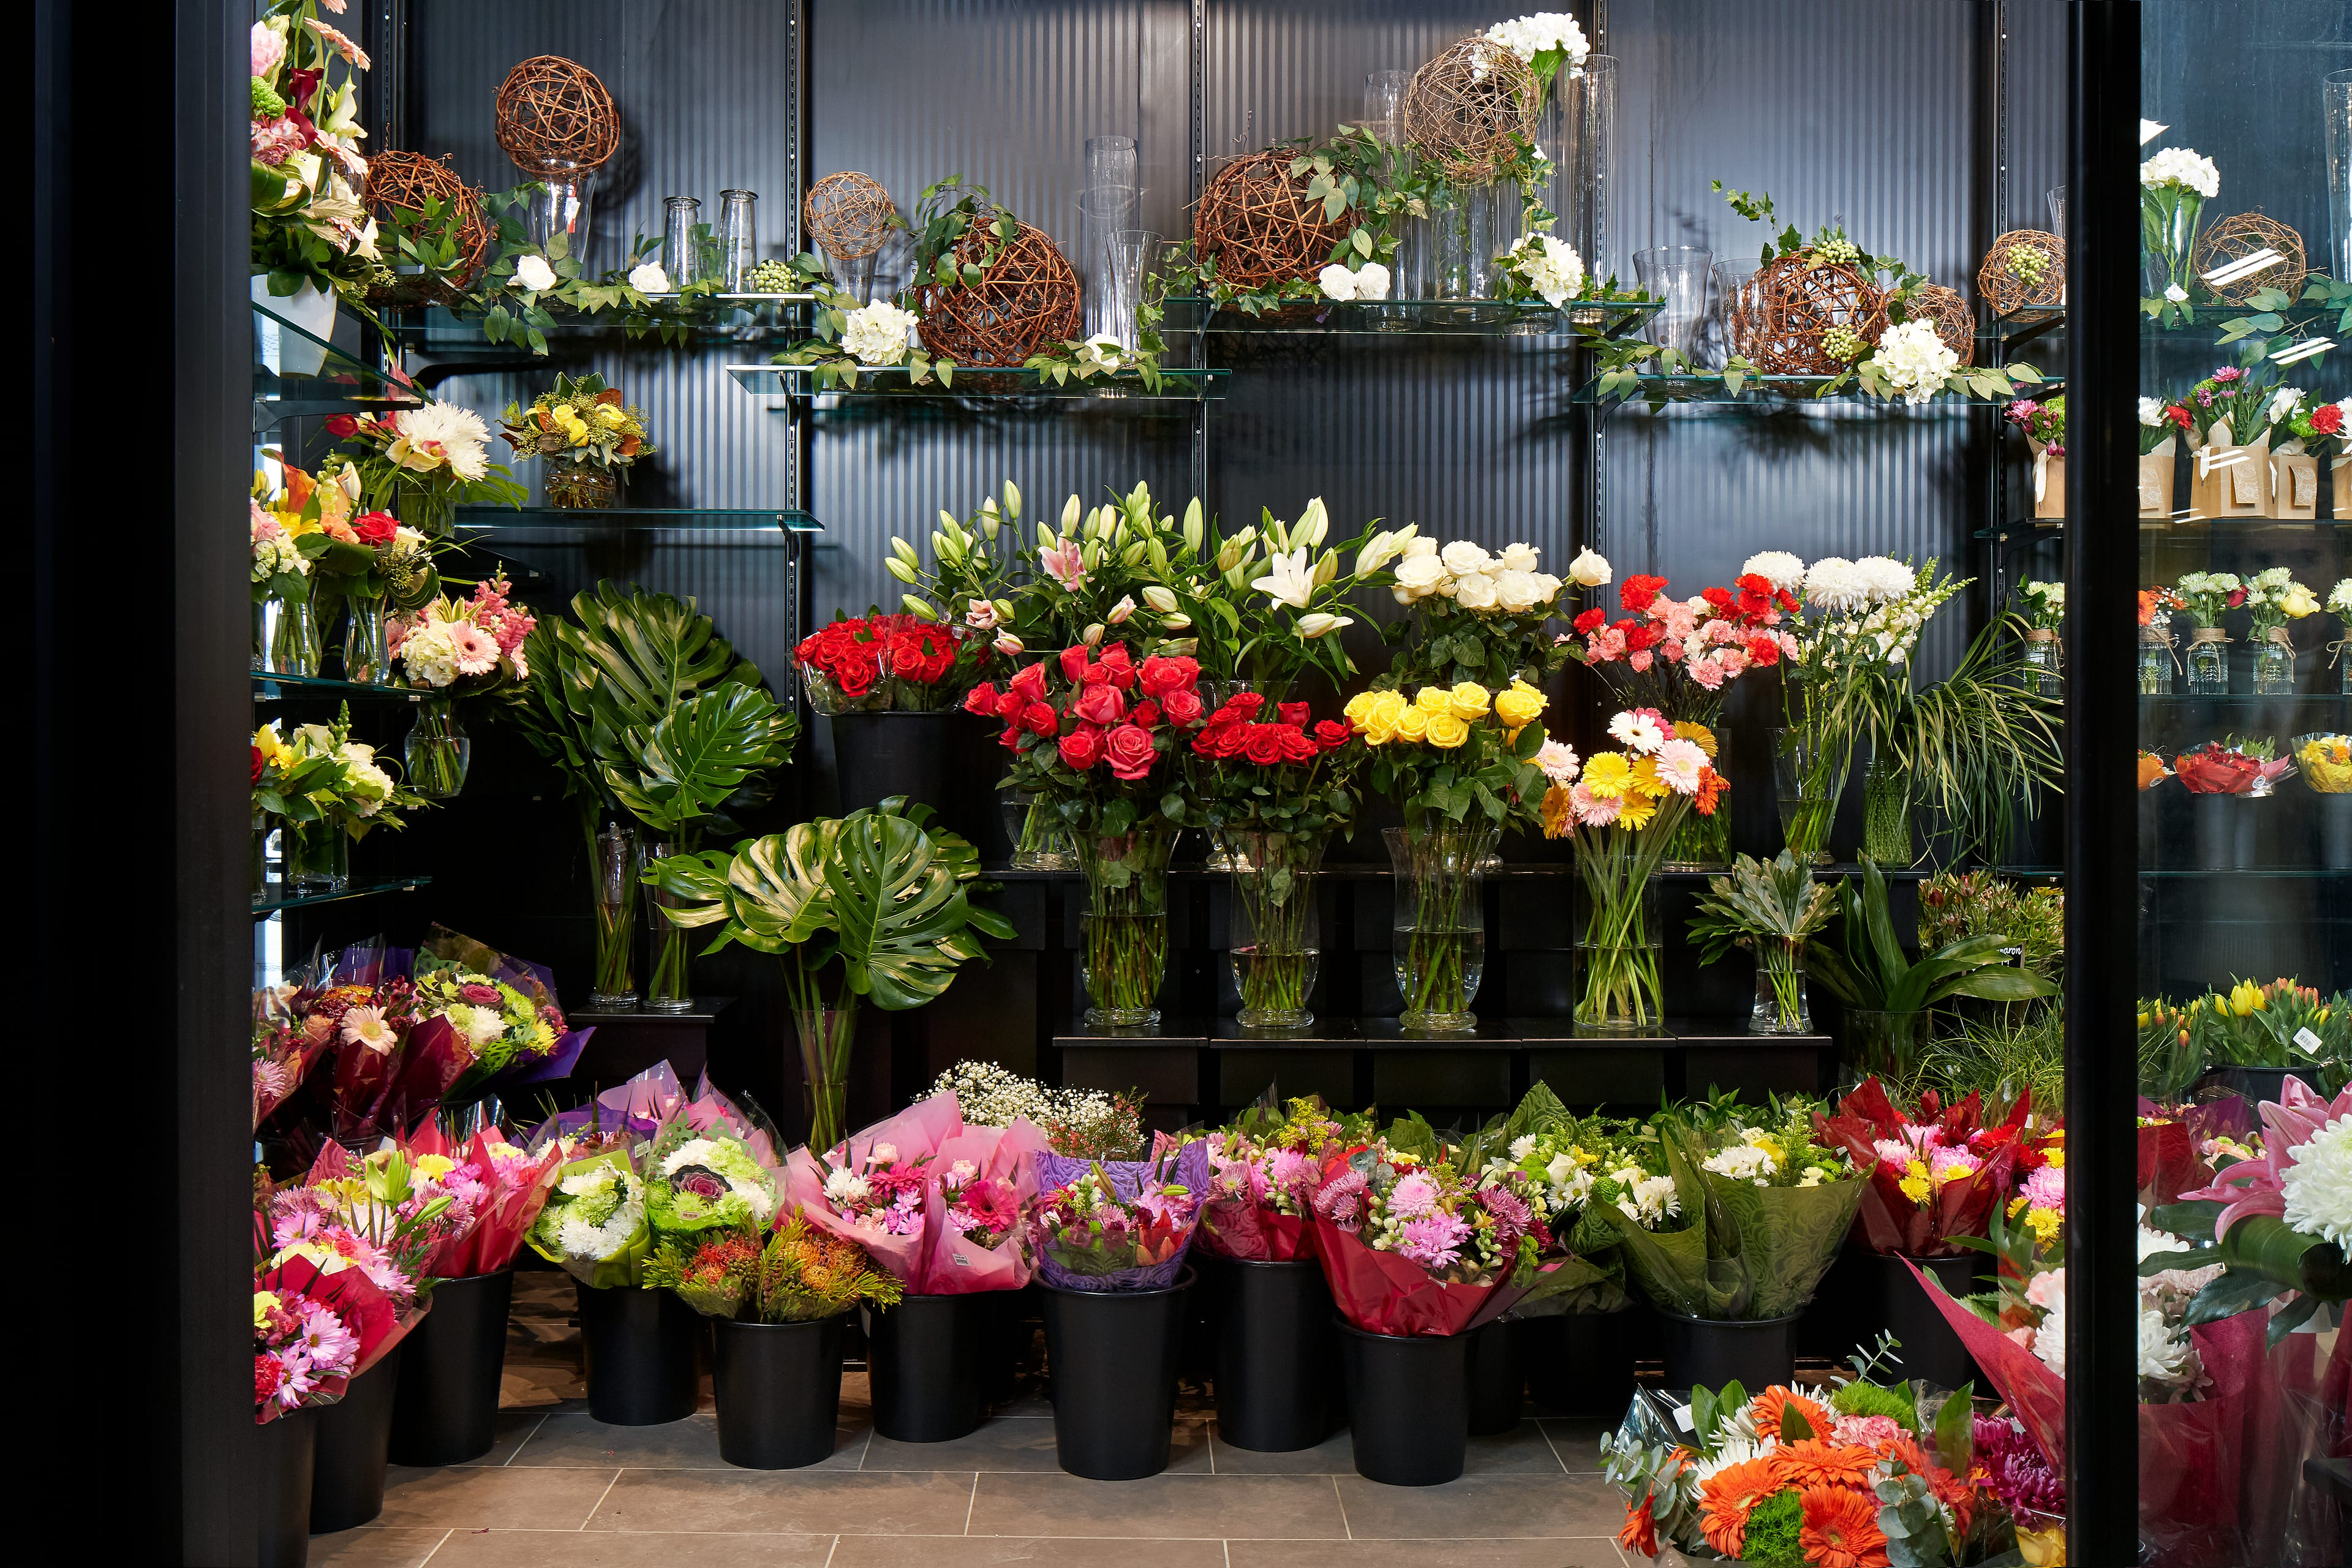 The Flowers by Fortinos floral counter surrounded by dozens of bouquets and floral arrangements.